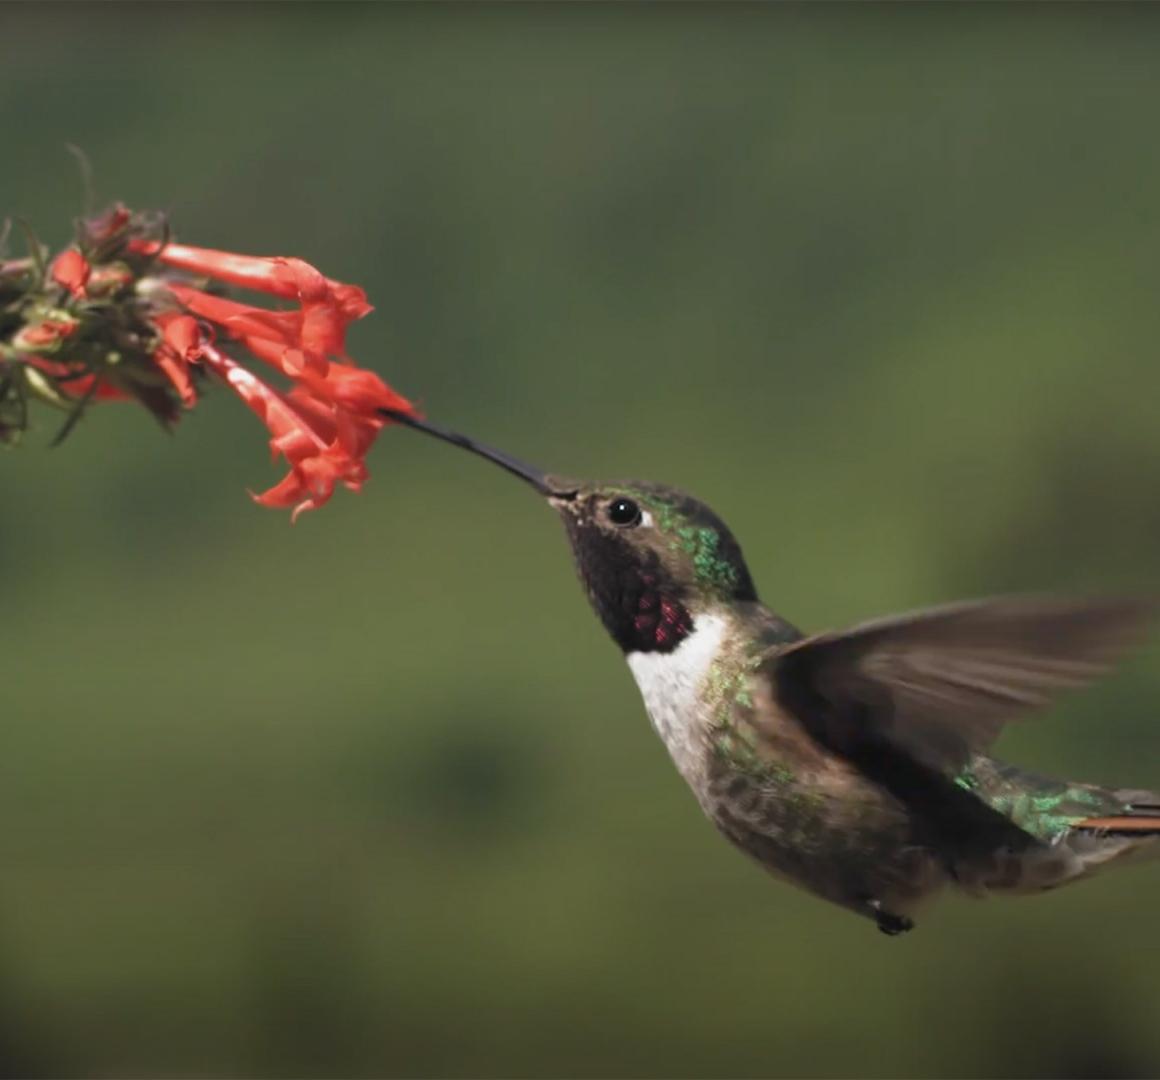 A hummingbird hovering in the air near a flower